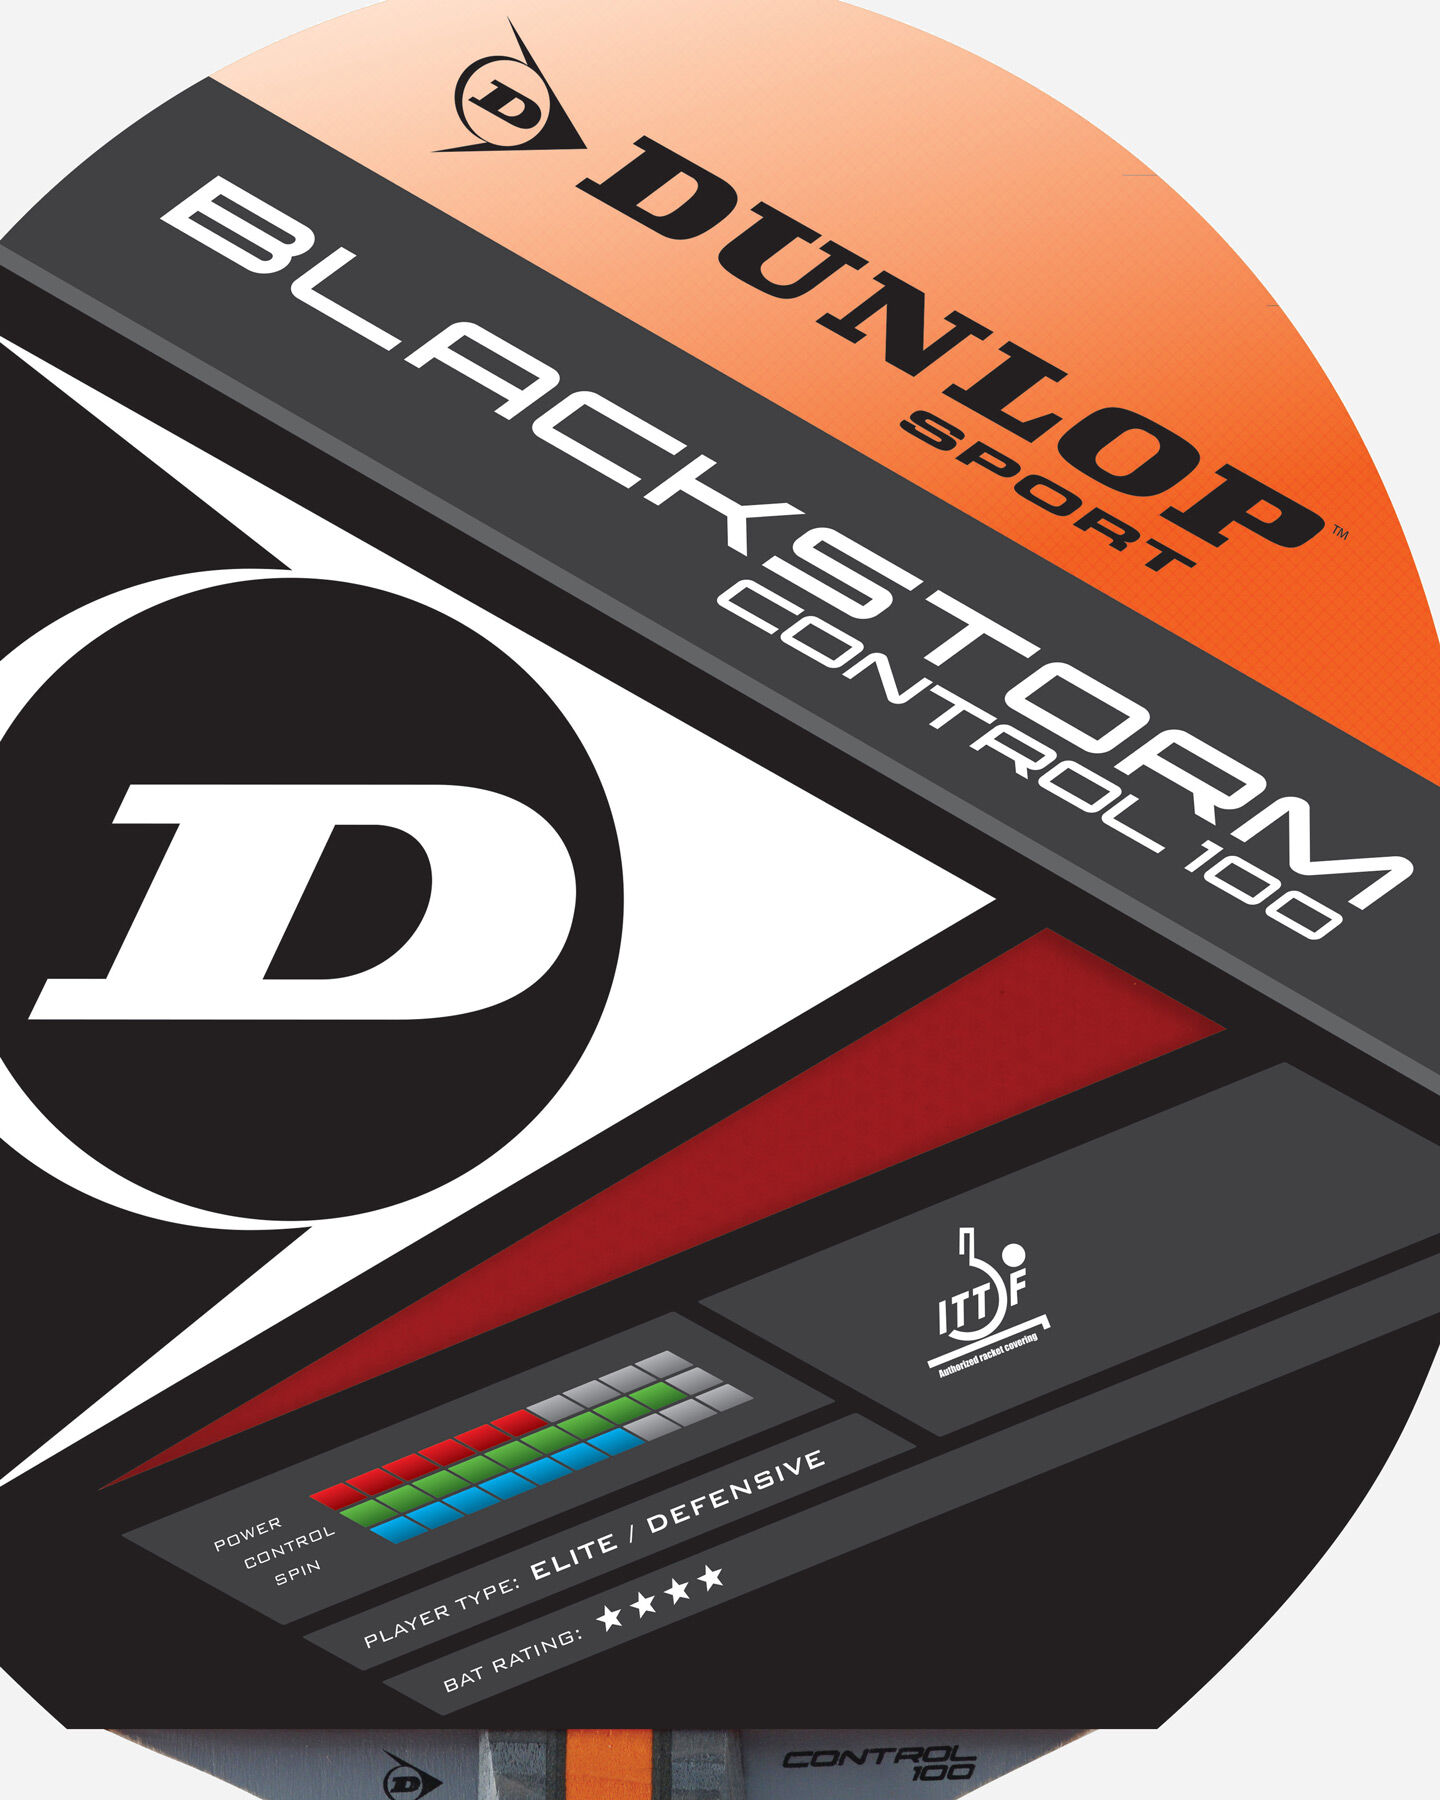  Accessorio ping pong DUNLOP BLACK STORM SPIN S4010049|1|UNI scatto 1